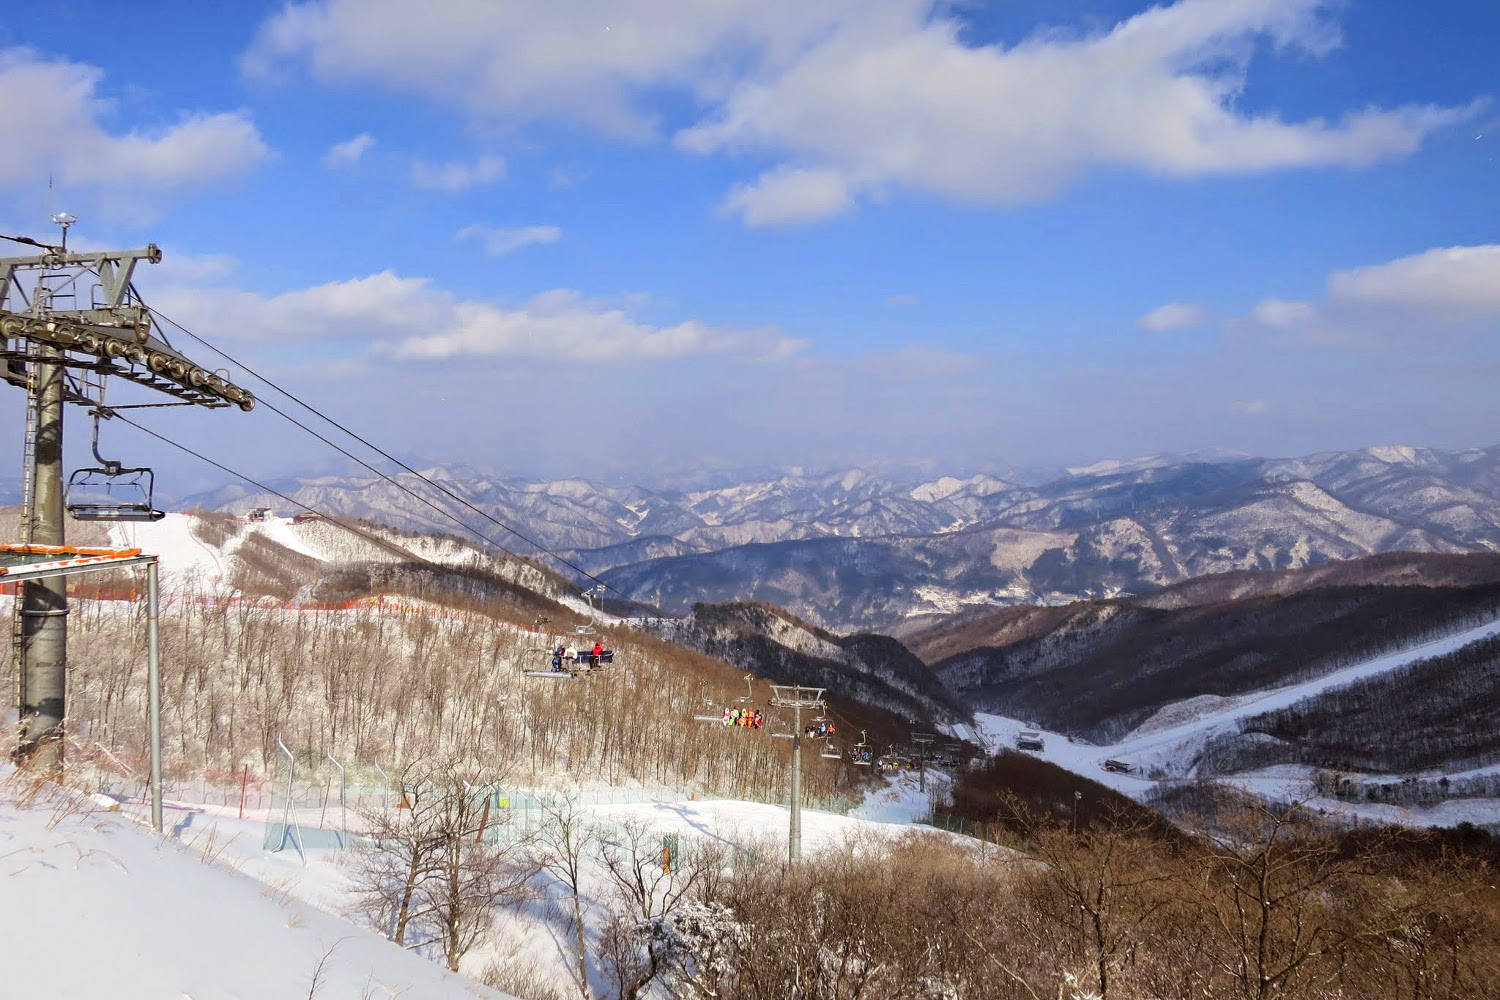 High1 boasts wide slopes and stunning views over the Taebaek Mountains. Image by Megan Eaves / Lonely Planet